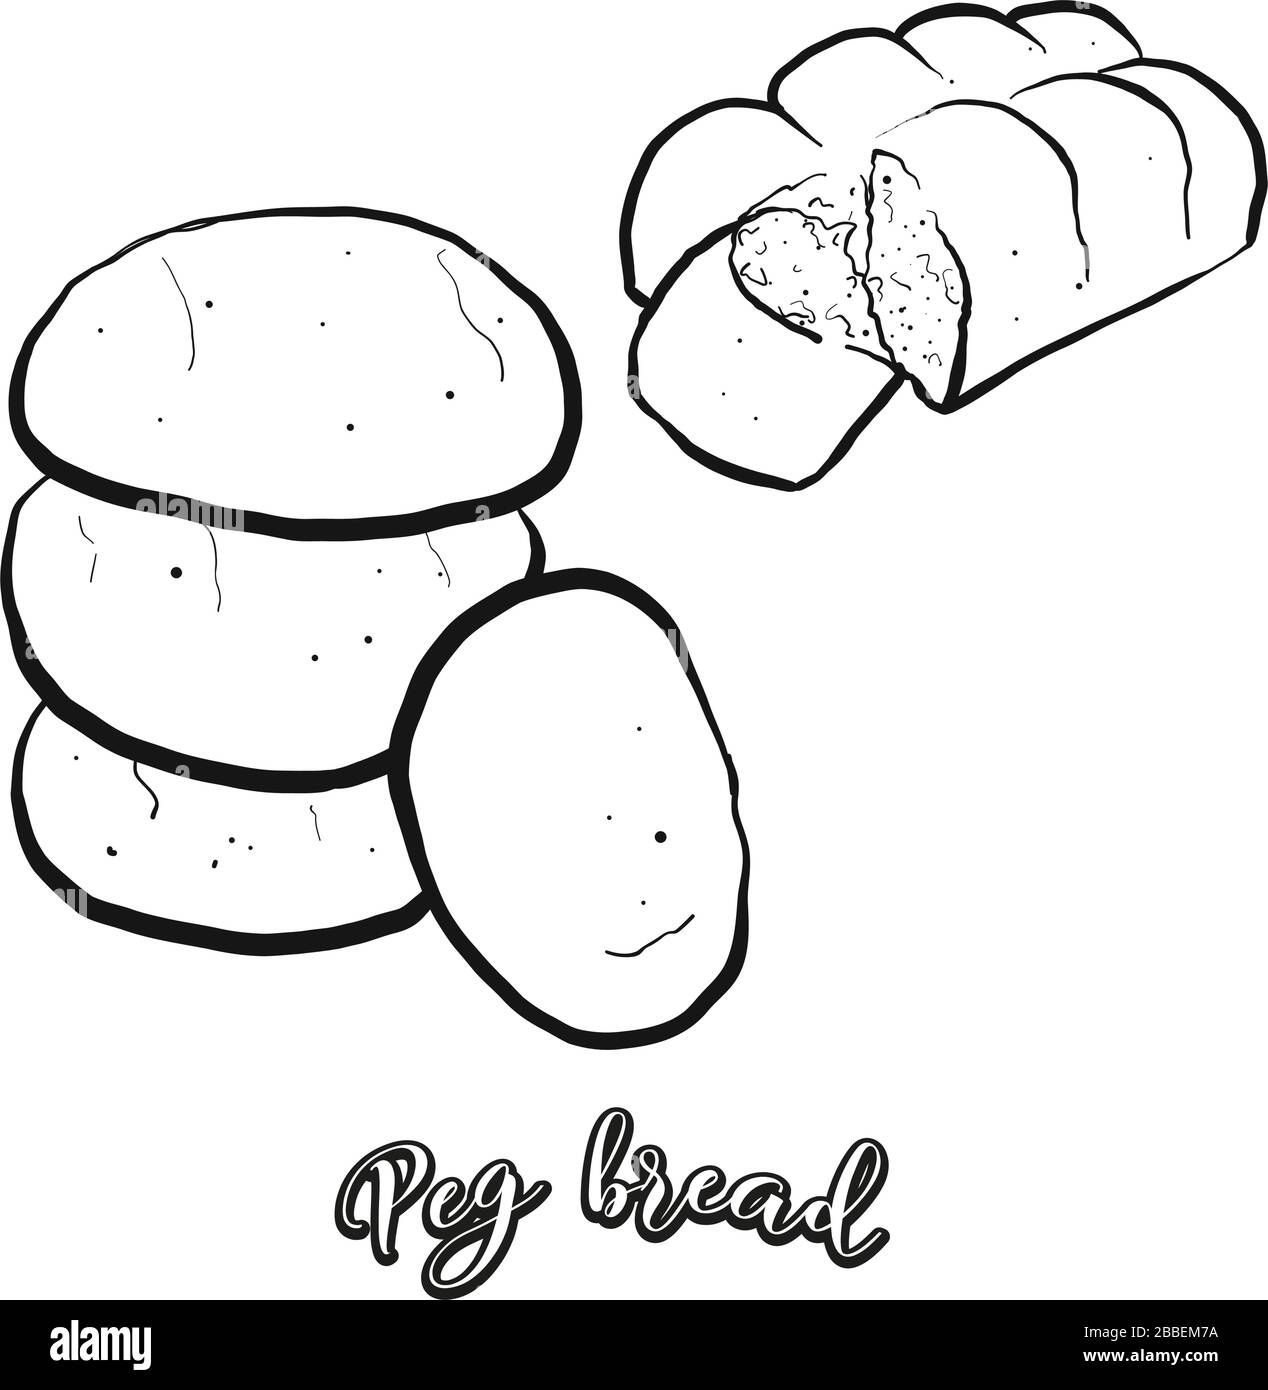 Peg bread food sketch separated on white. Vector drawing of Leavened, lobed loaf, usually known in Jamaica. Food illustration series. Stock Vector